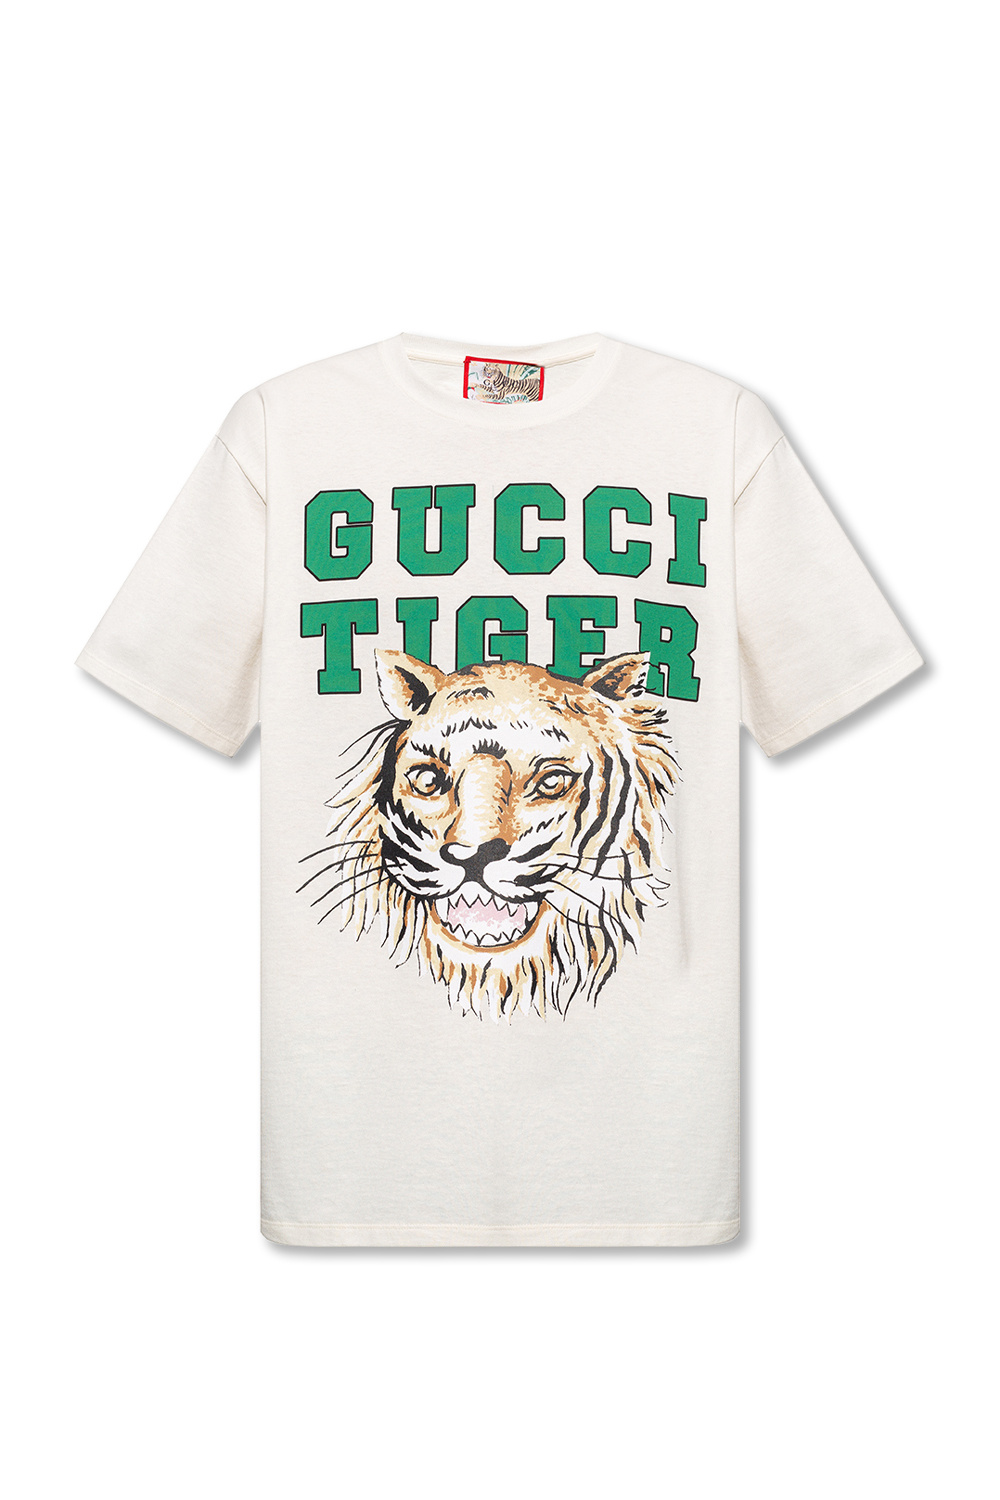 Gucci Printed T-shirt from the 'Gucci Tiger' collection | Men's